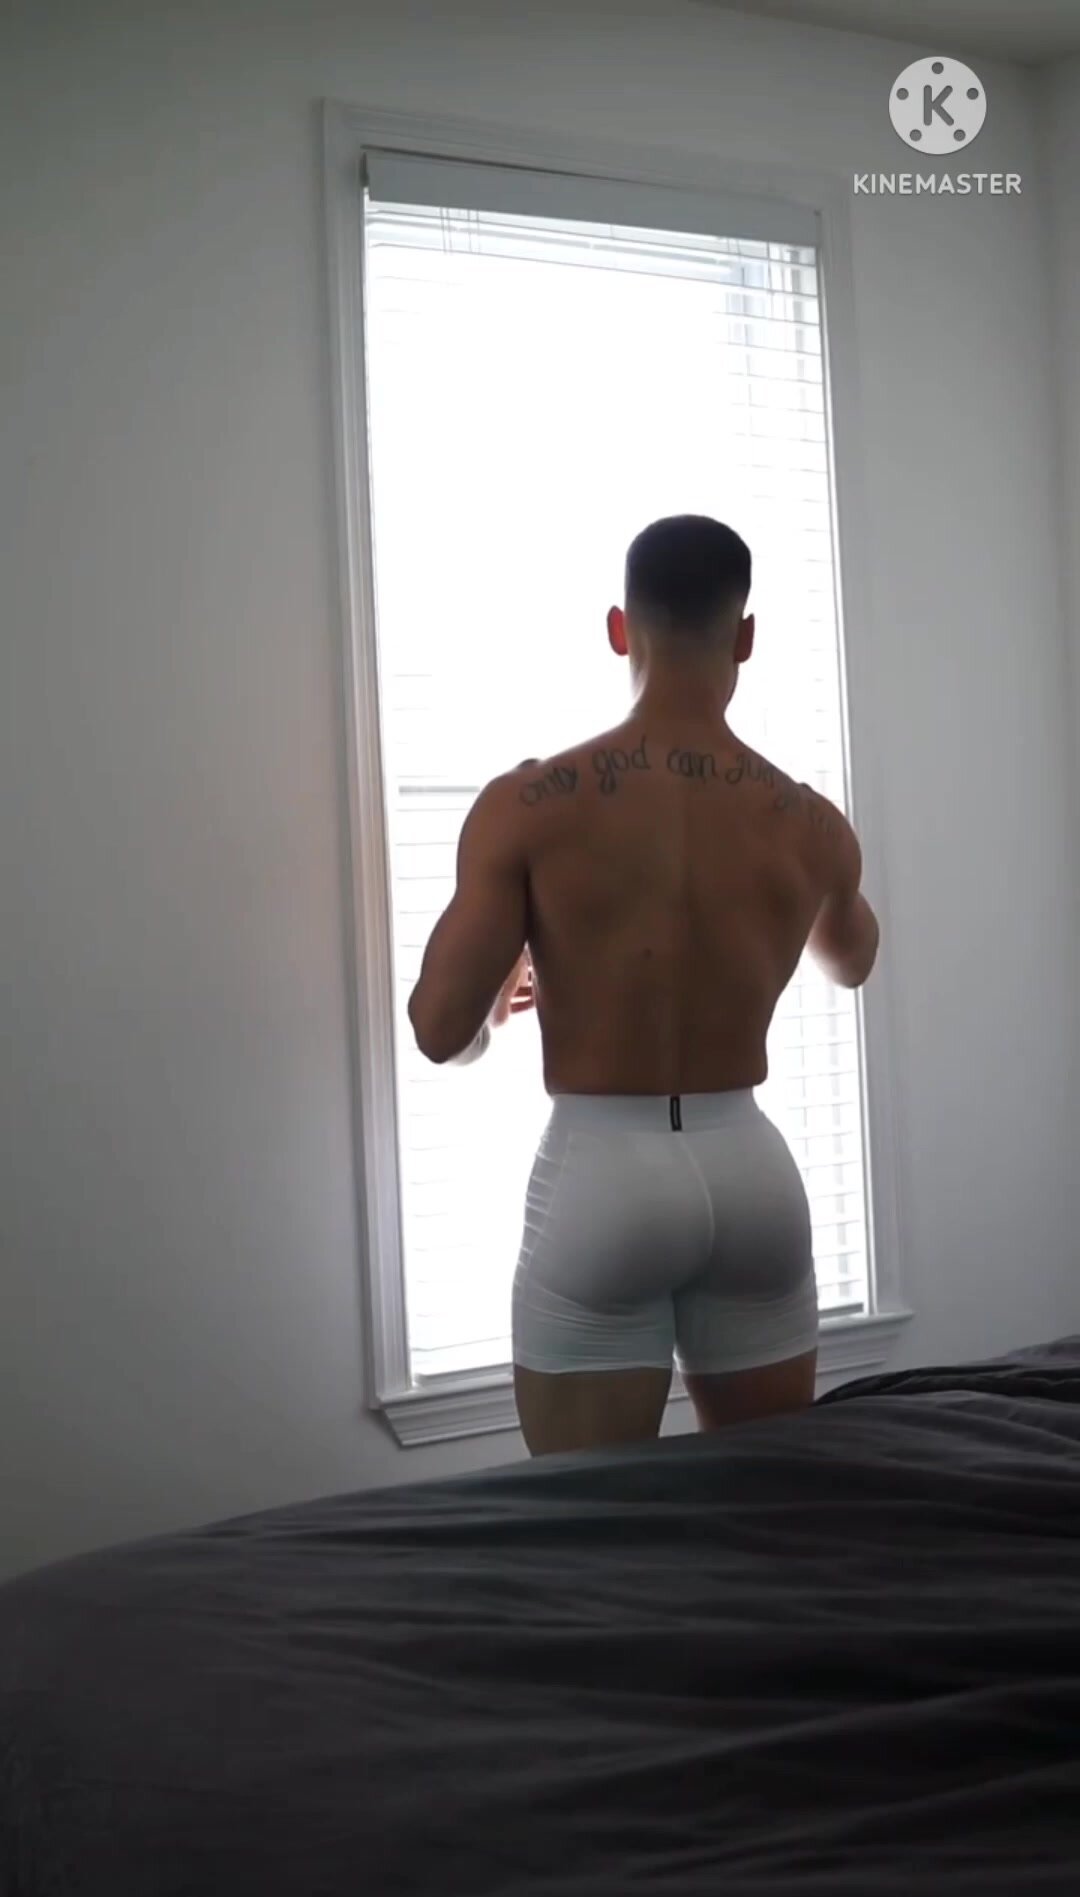 THICC Instagram Guy